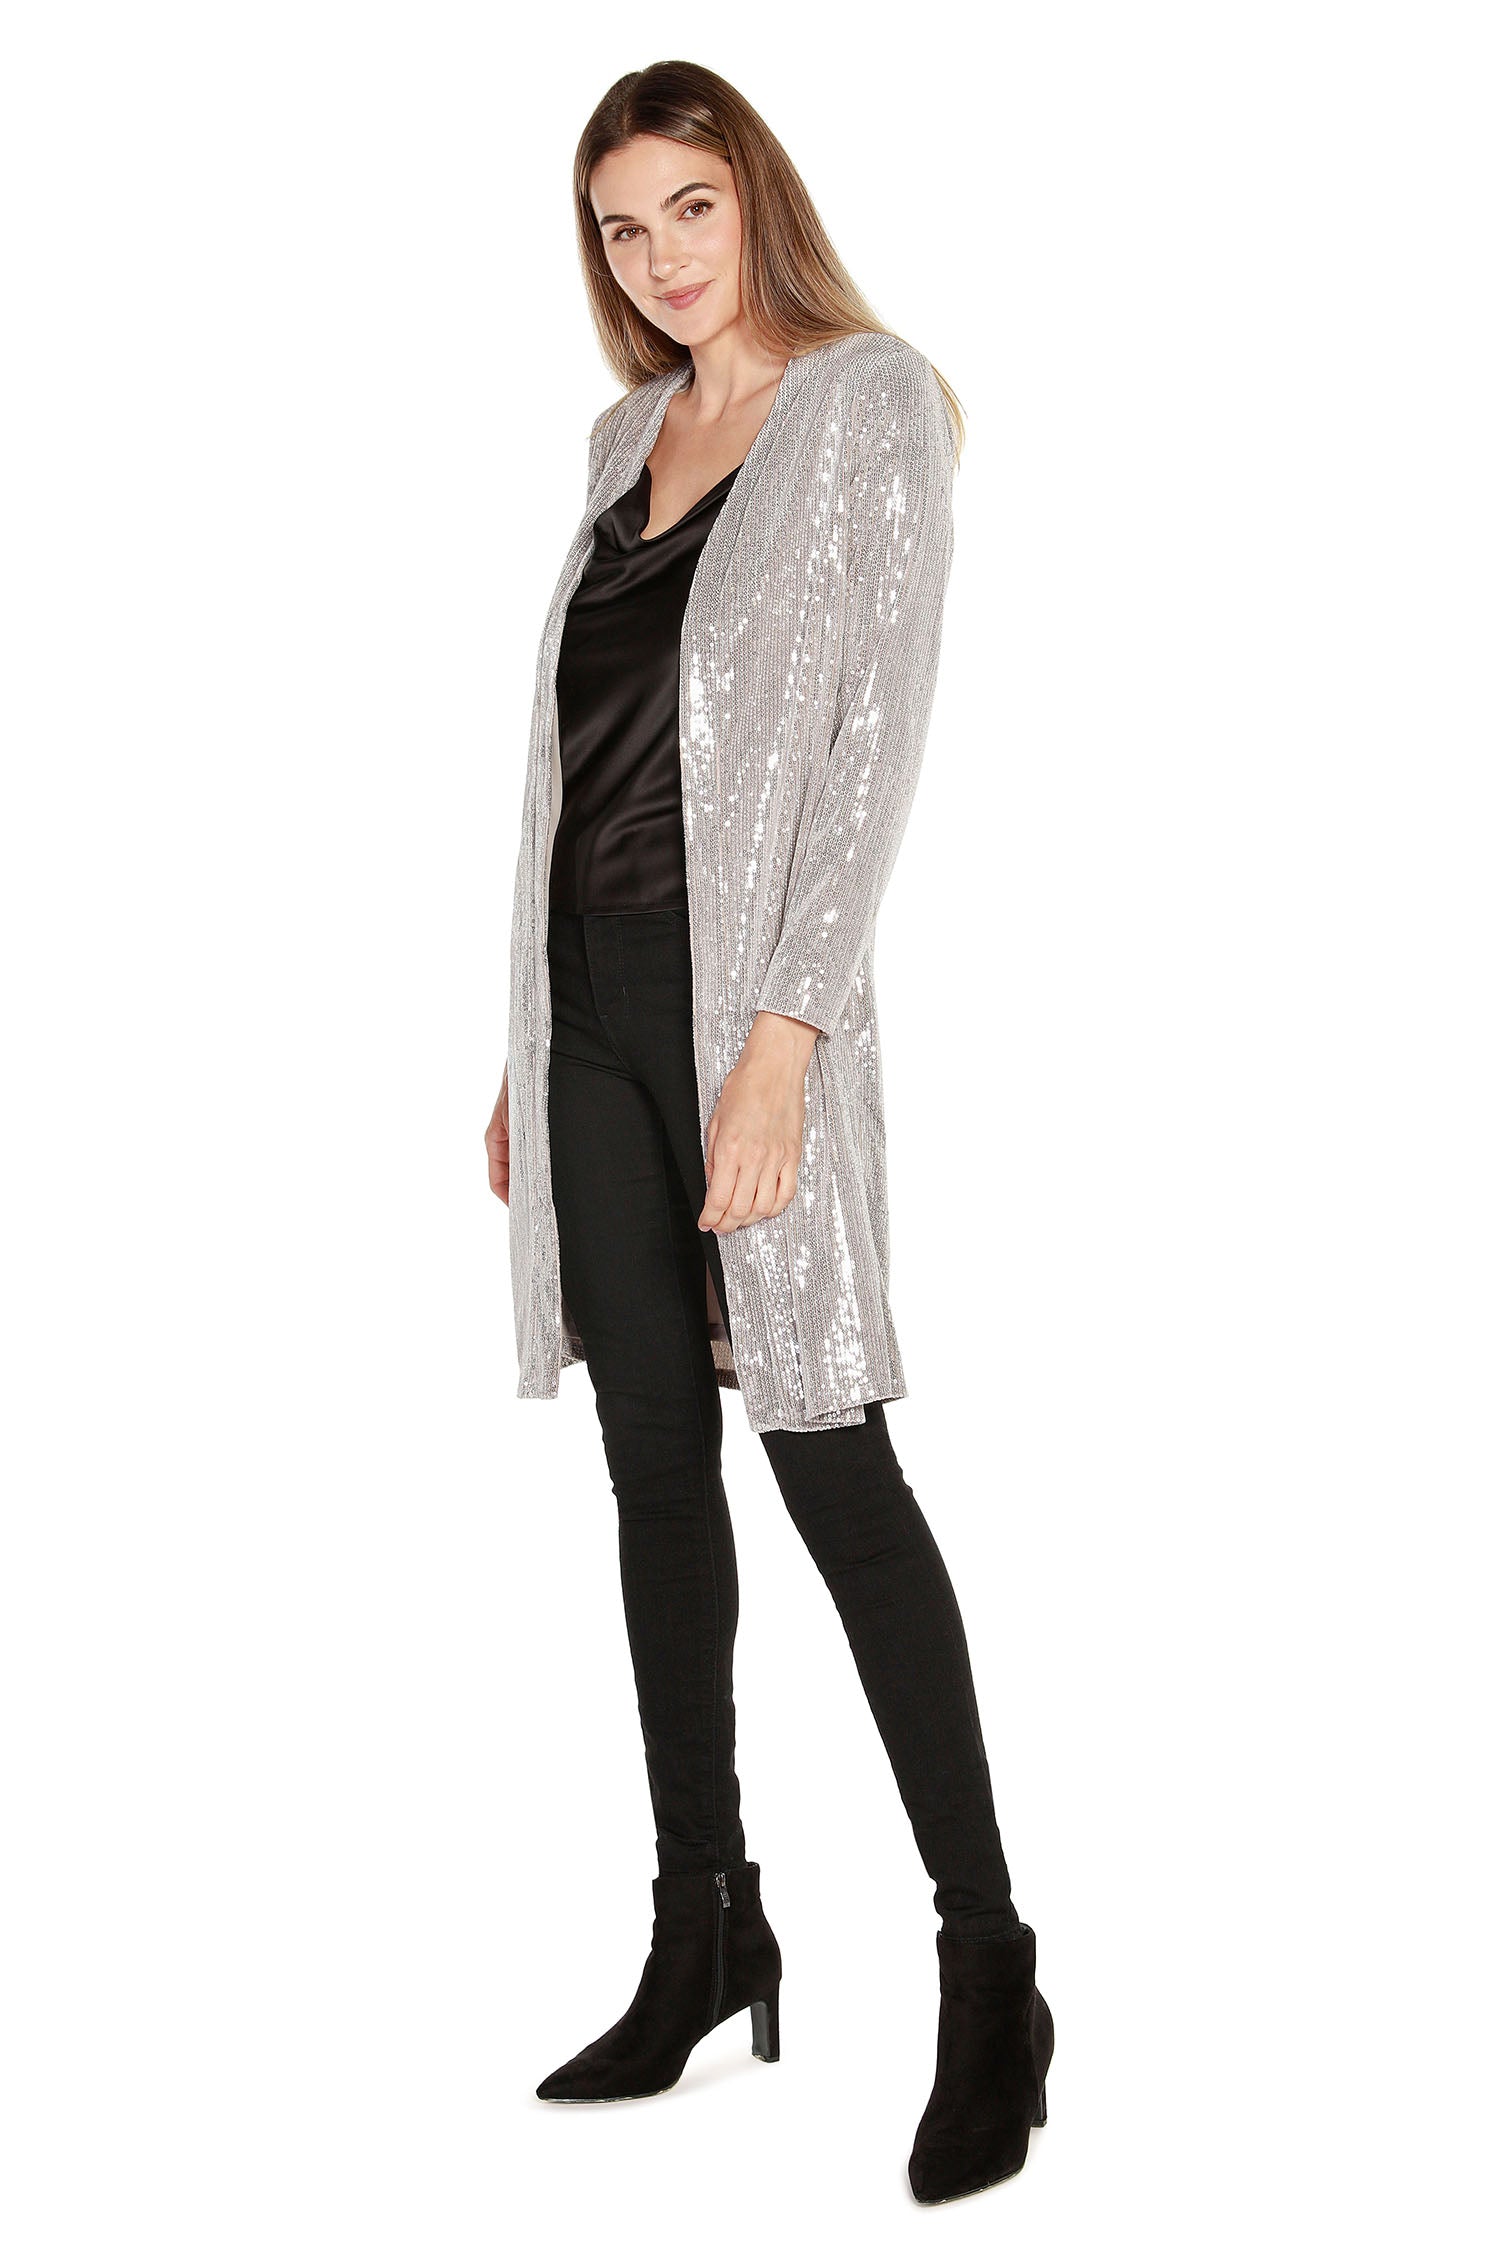 Women's Holiday Sequin Cardigan Open Front with Side Slits